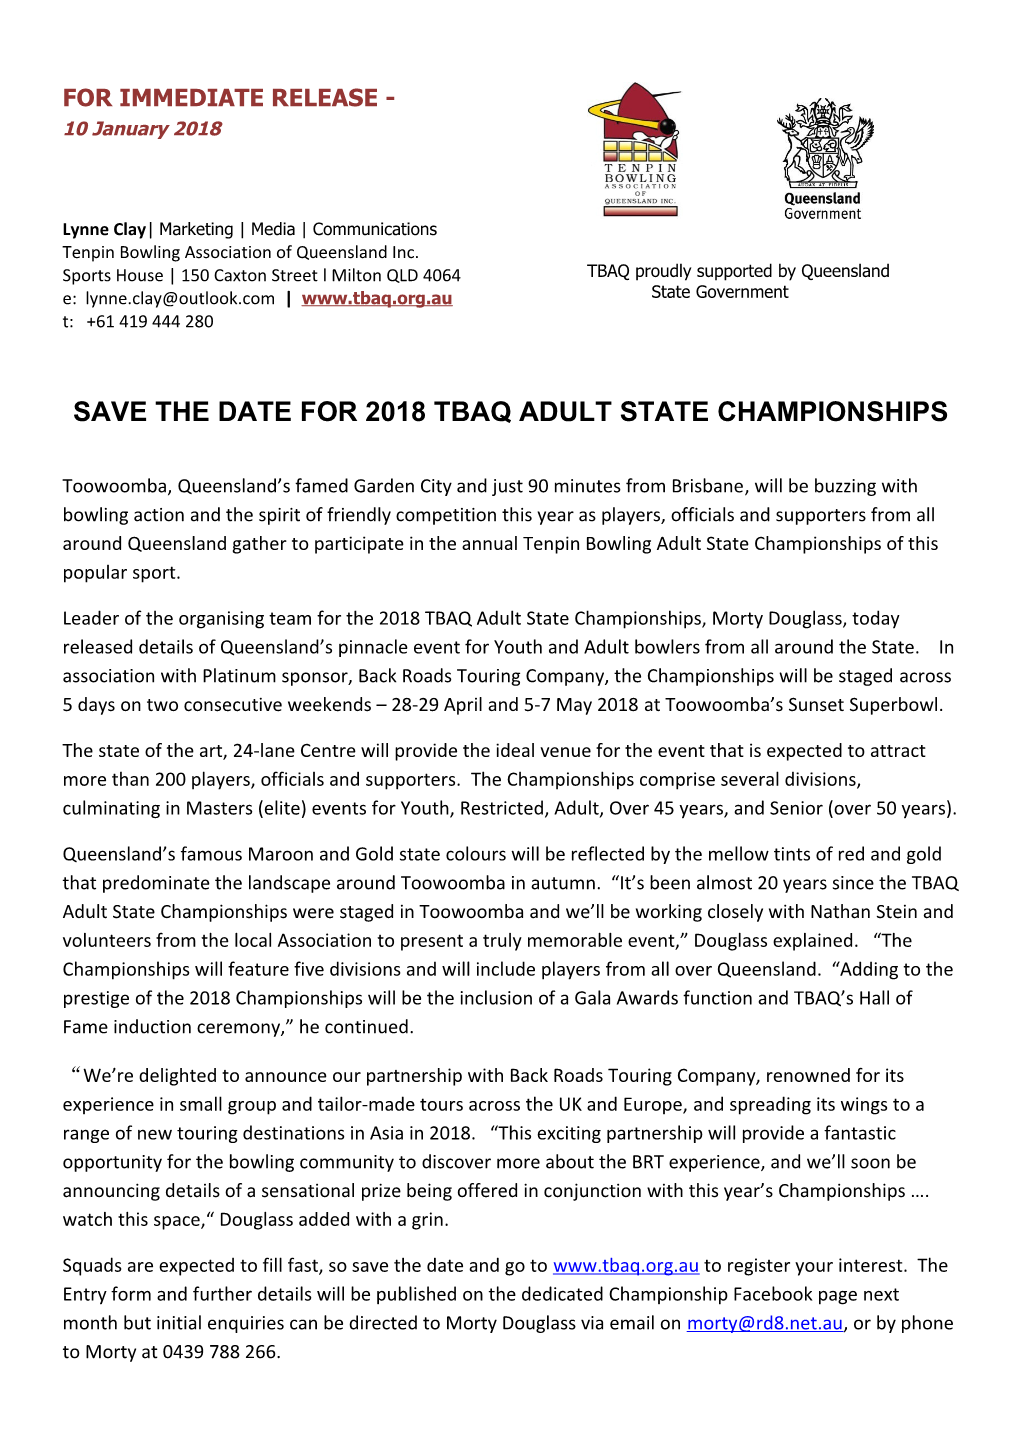 Save the Date for 2018 Tbaq Adult State Championships